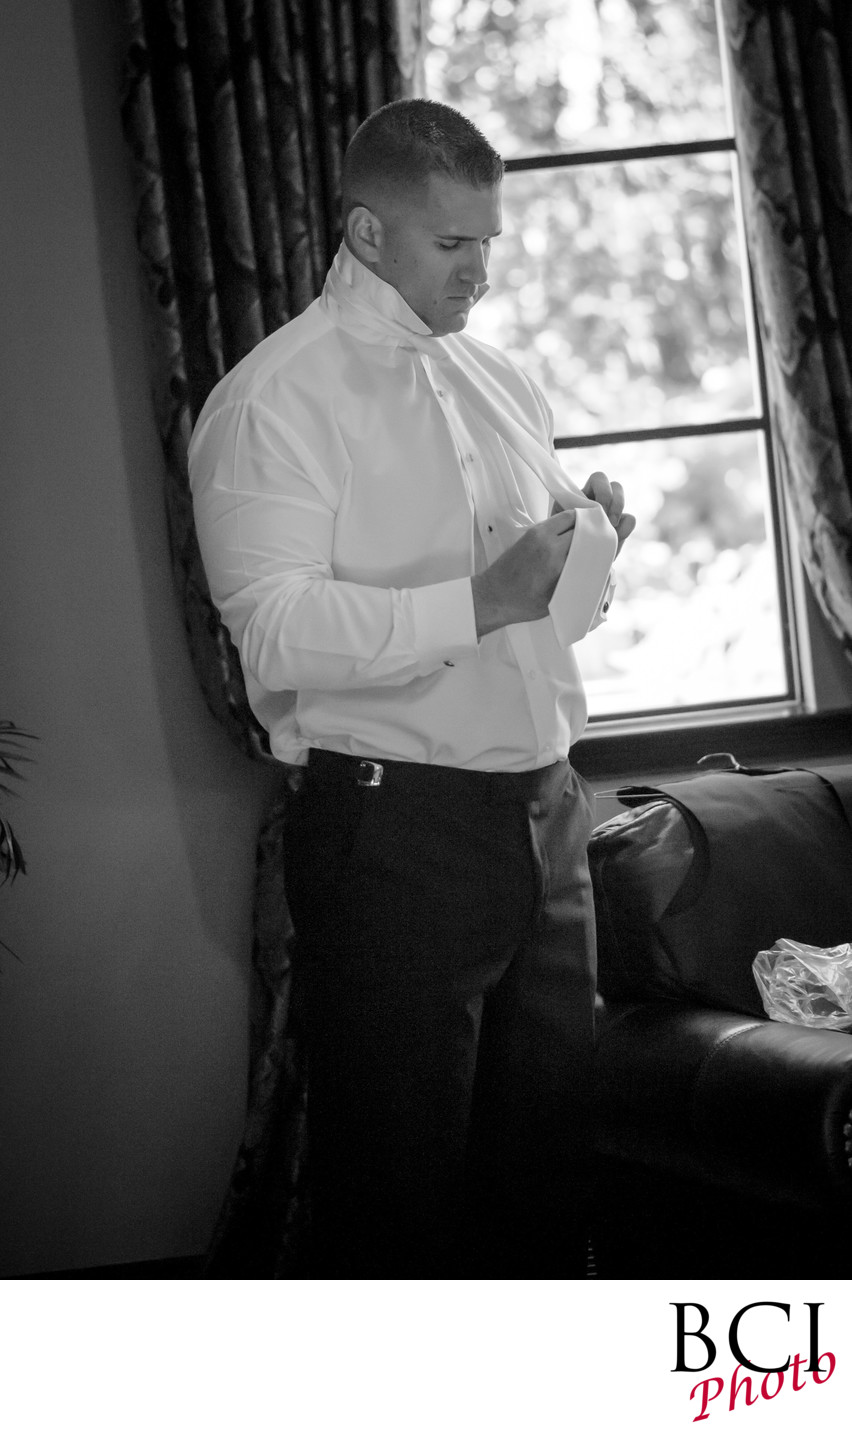 Great black and white wedding photographers near me